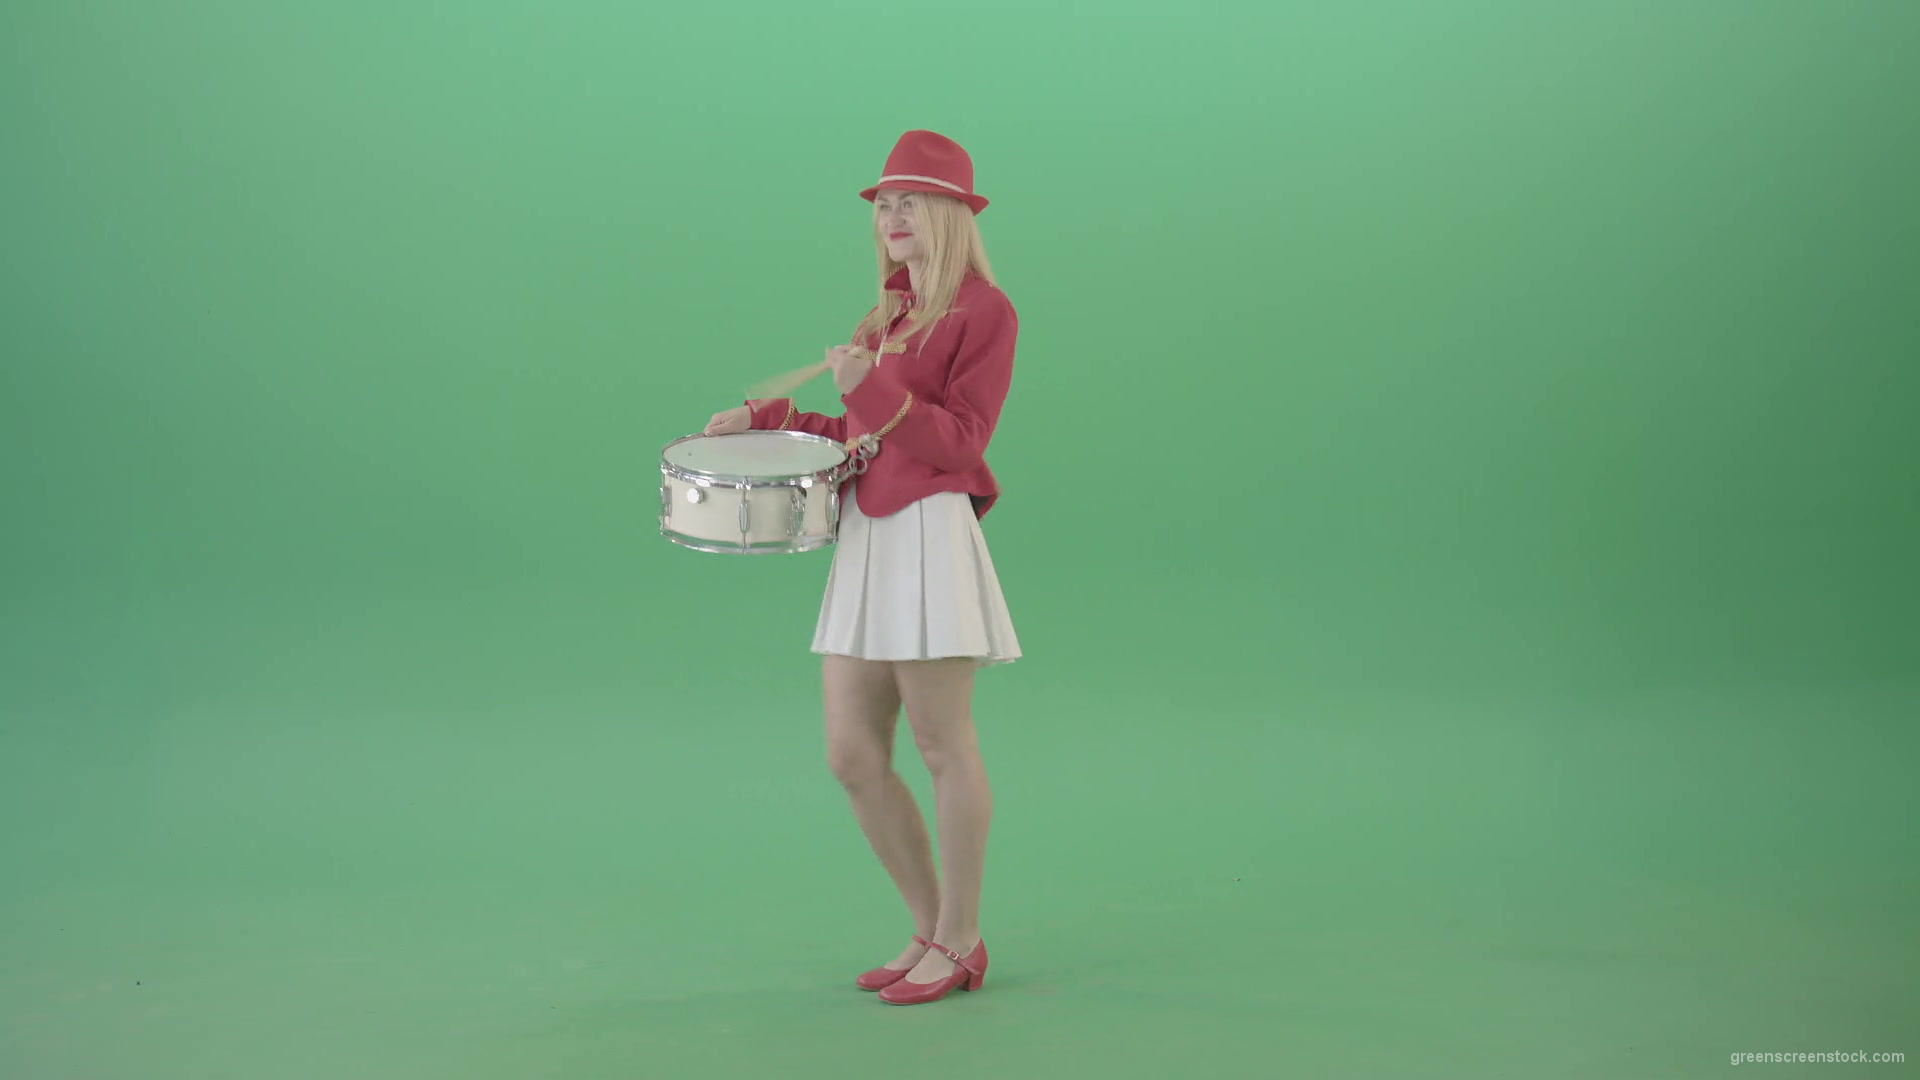 Red-Costume-Girl-in-Side-view-marching-on-green-screen-and-playing-snare-drum-4K-Video-Footage-1920_004 Green Screen Stock